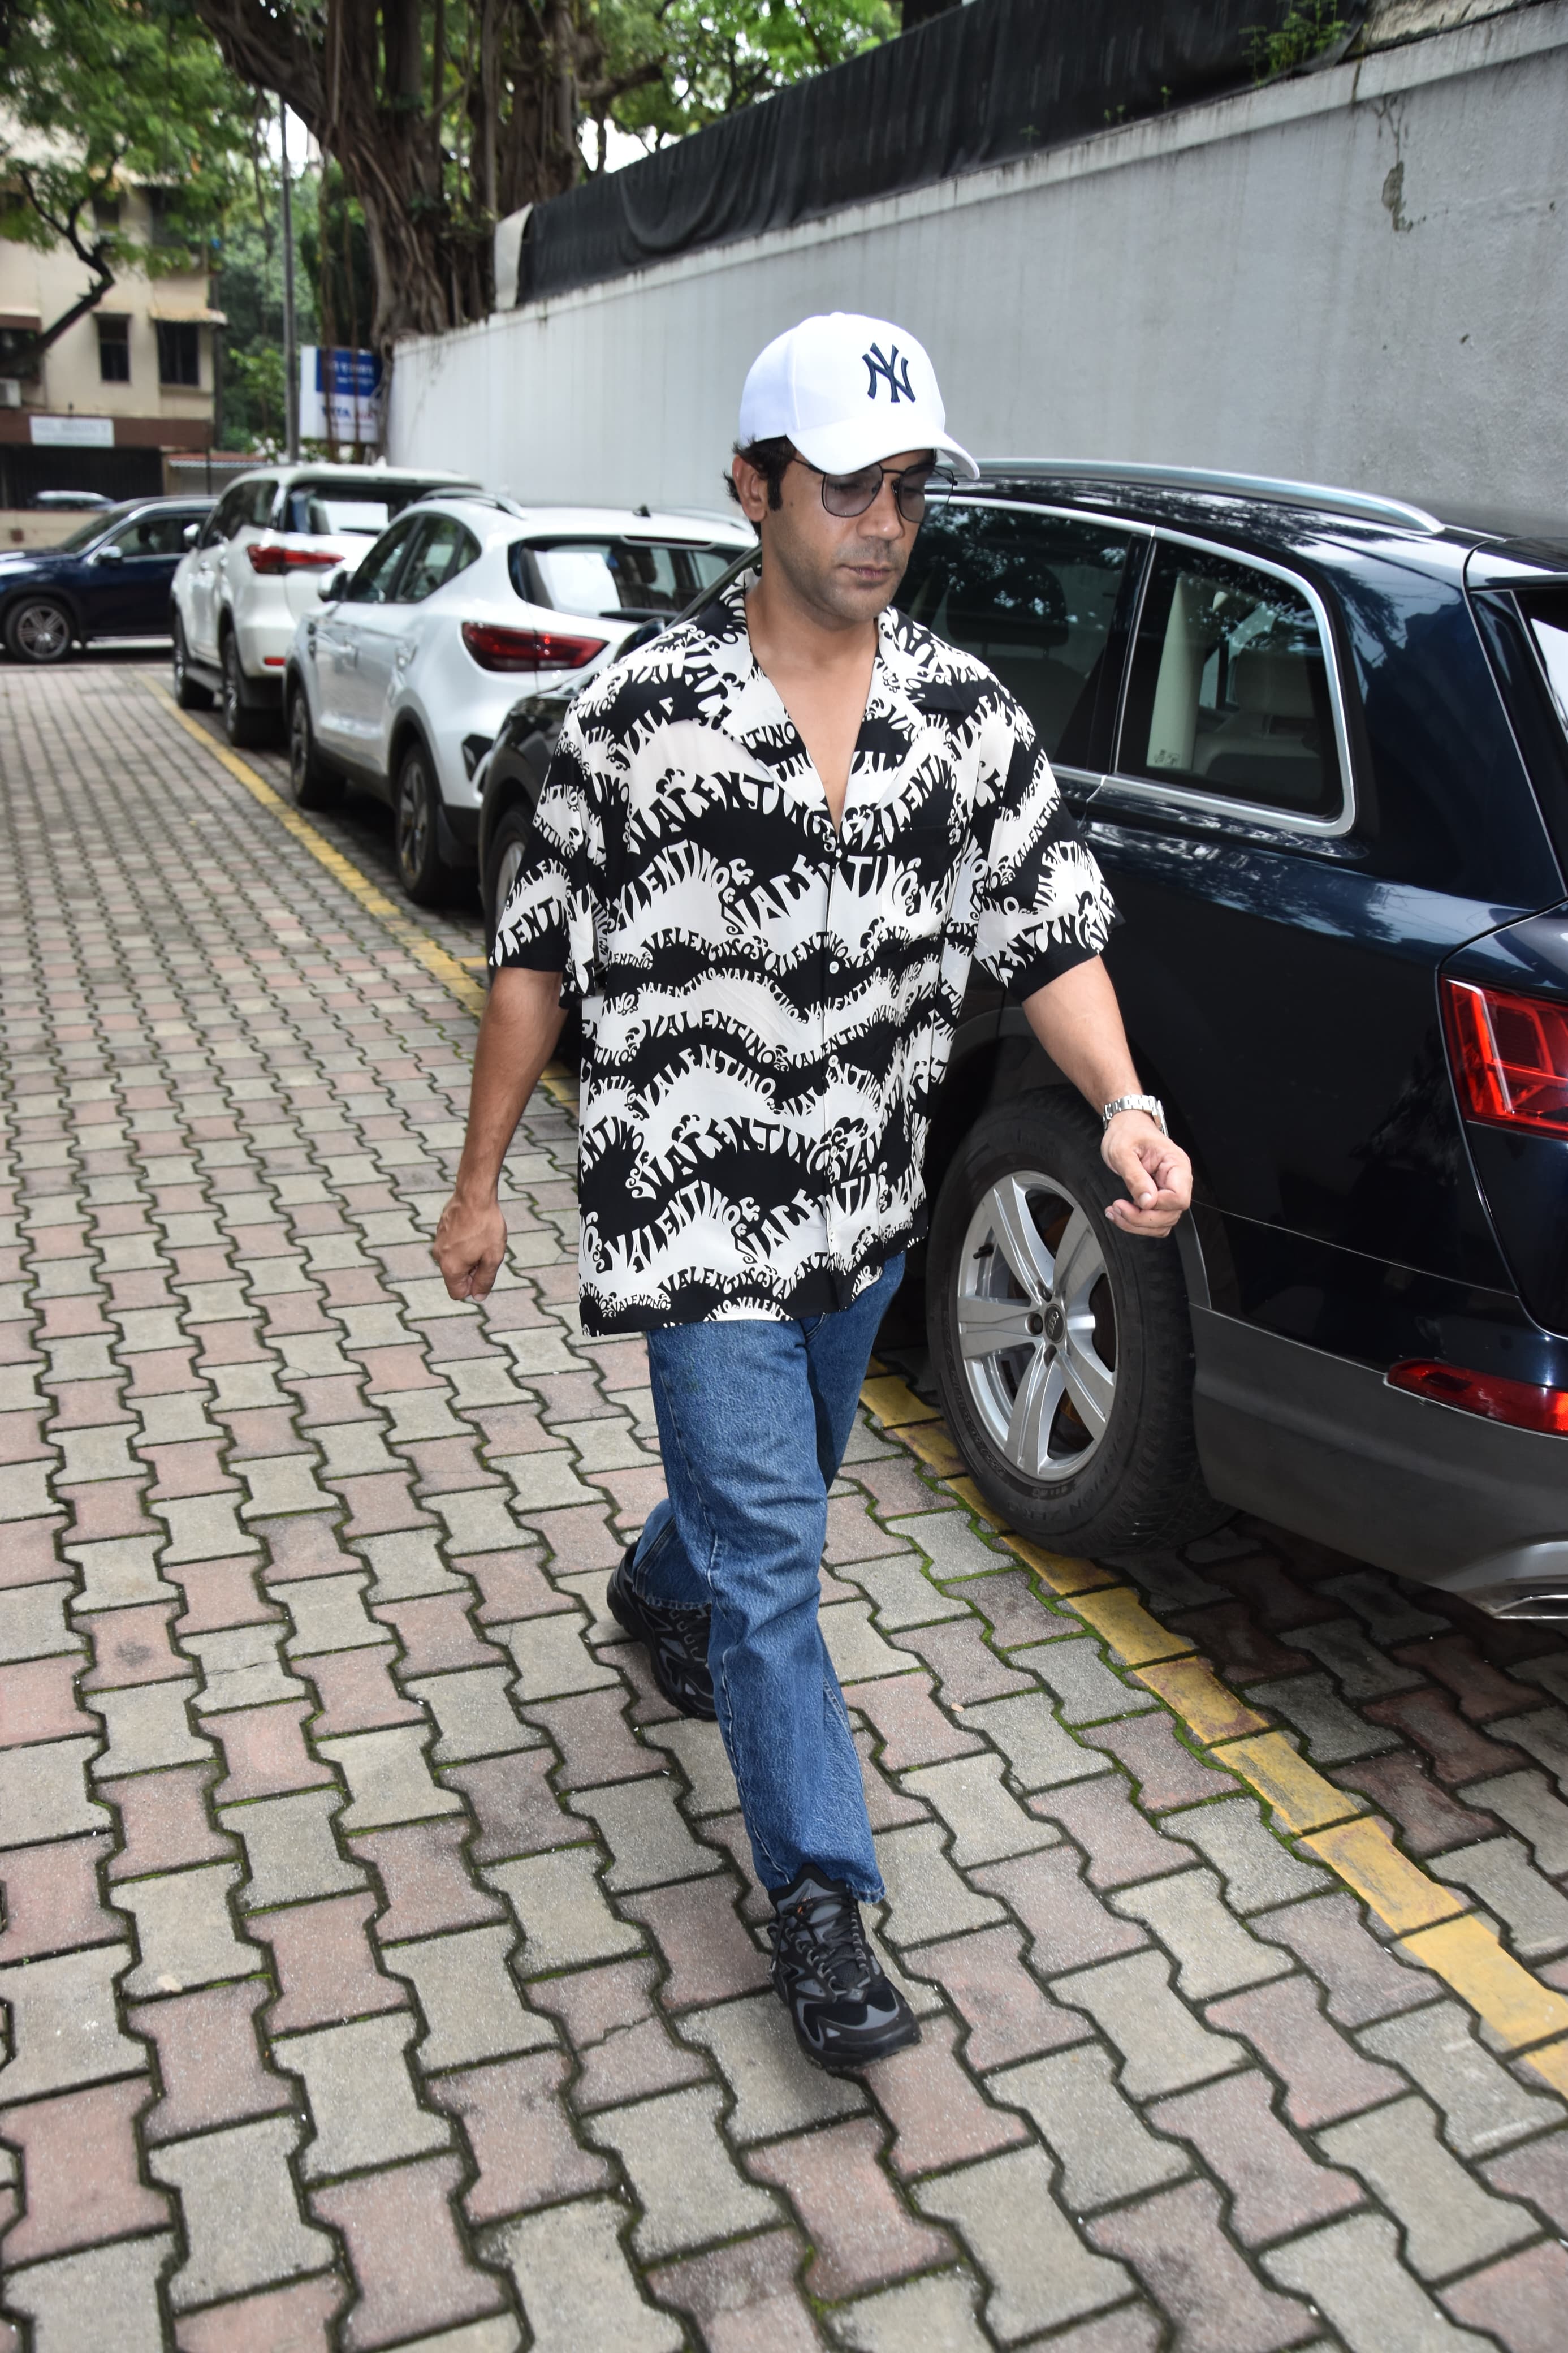 Rajkummar Rao was snapped wearing a cool printed shirt paired with blue jeans